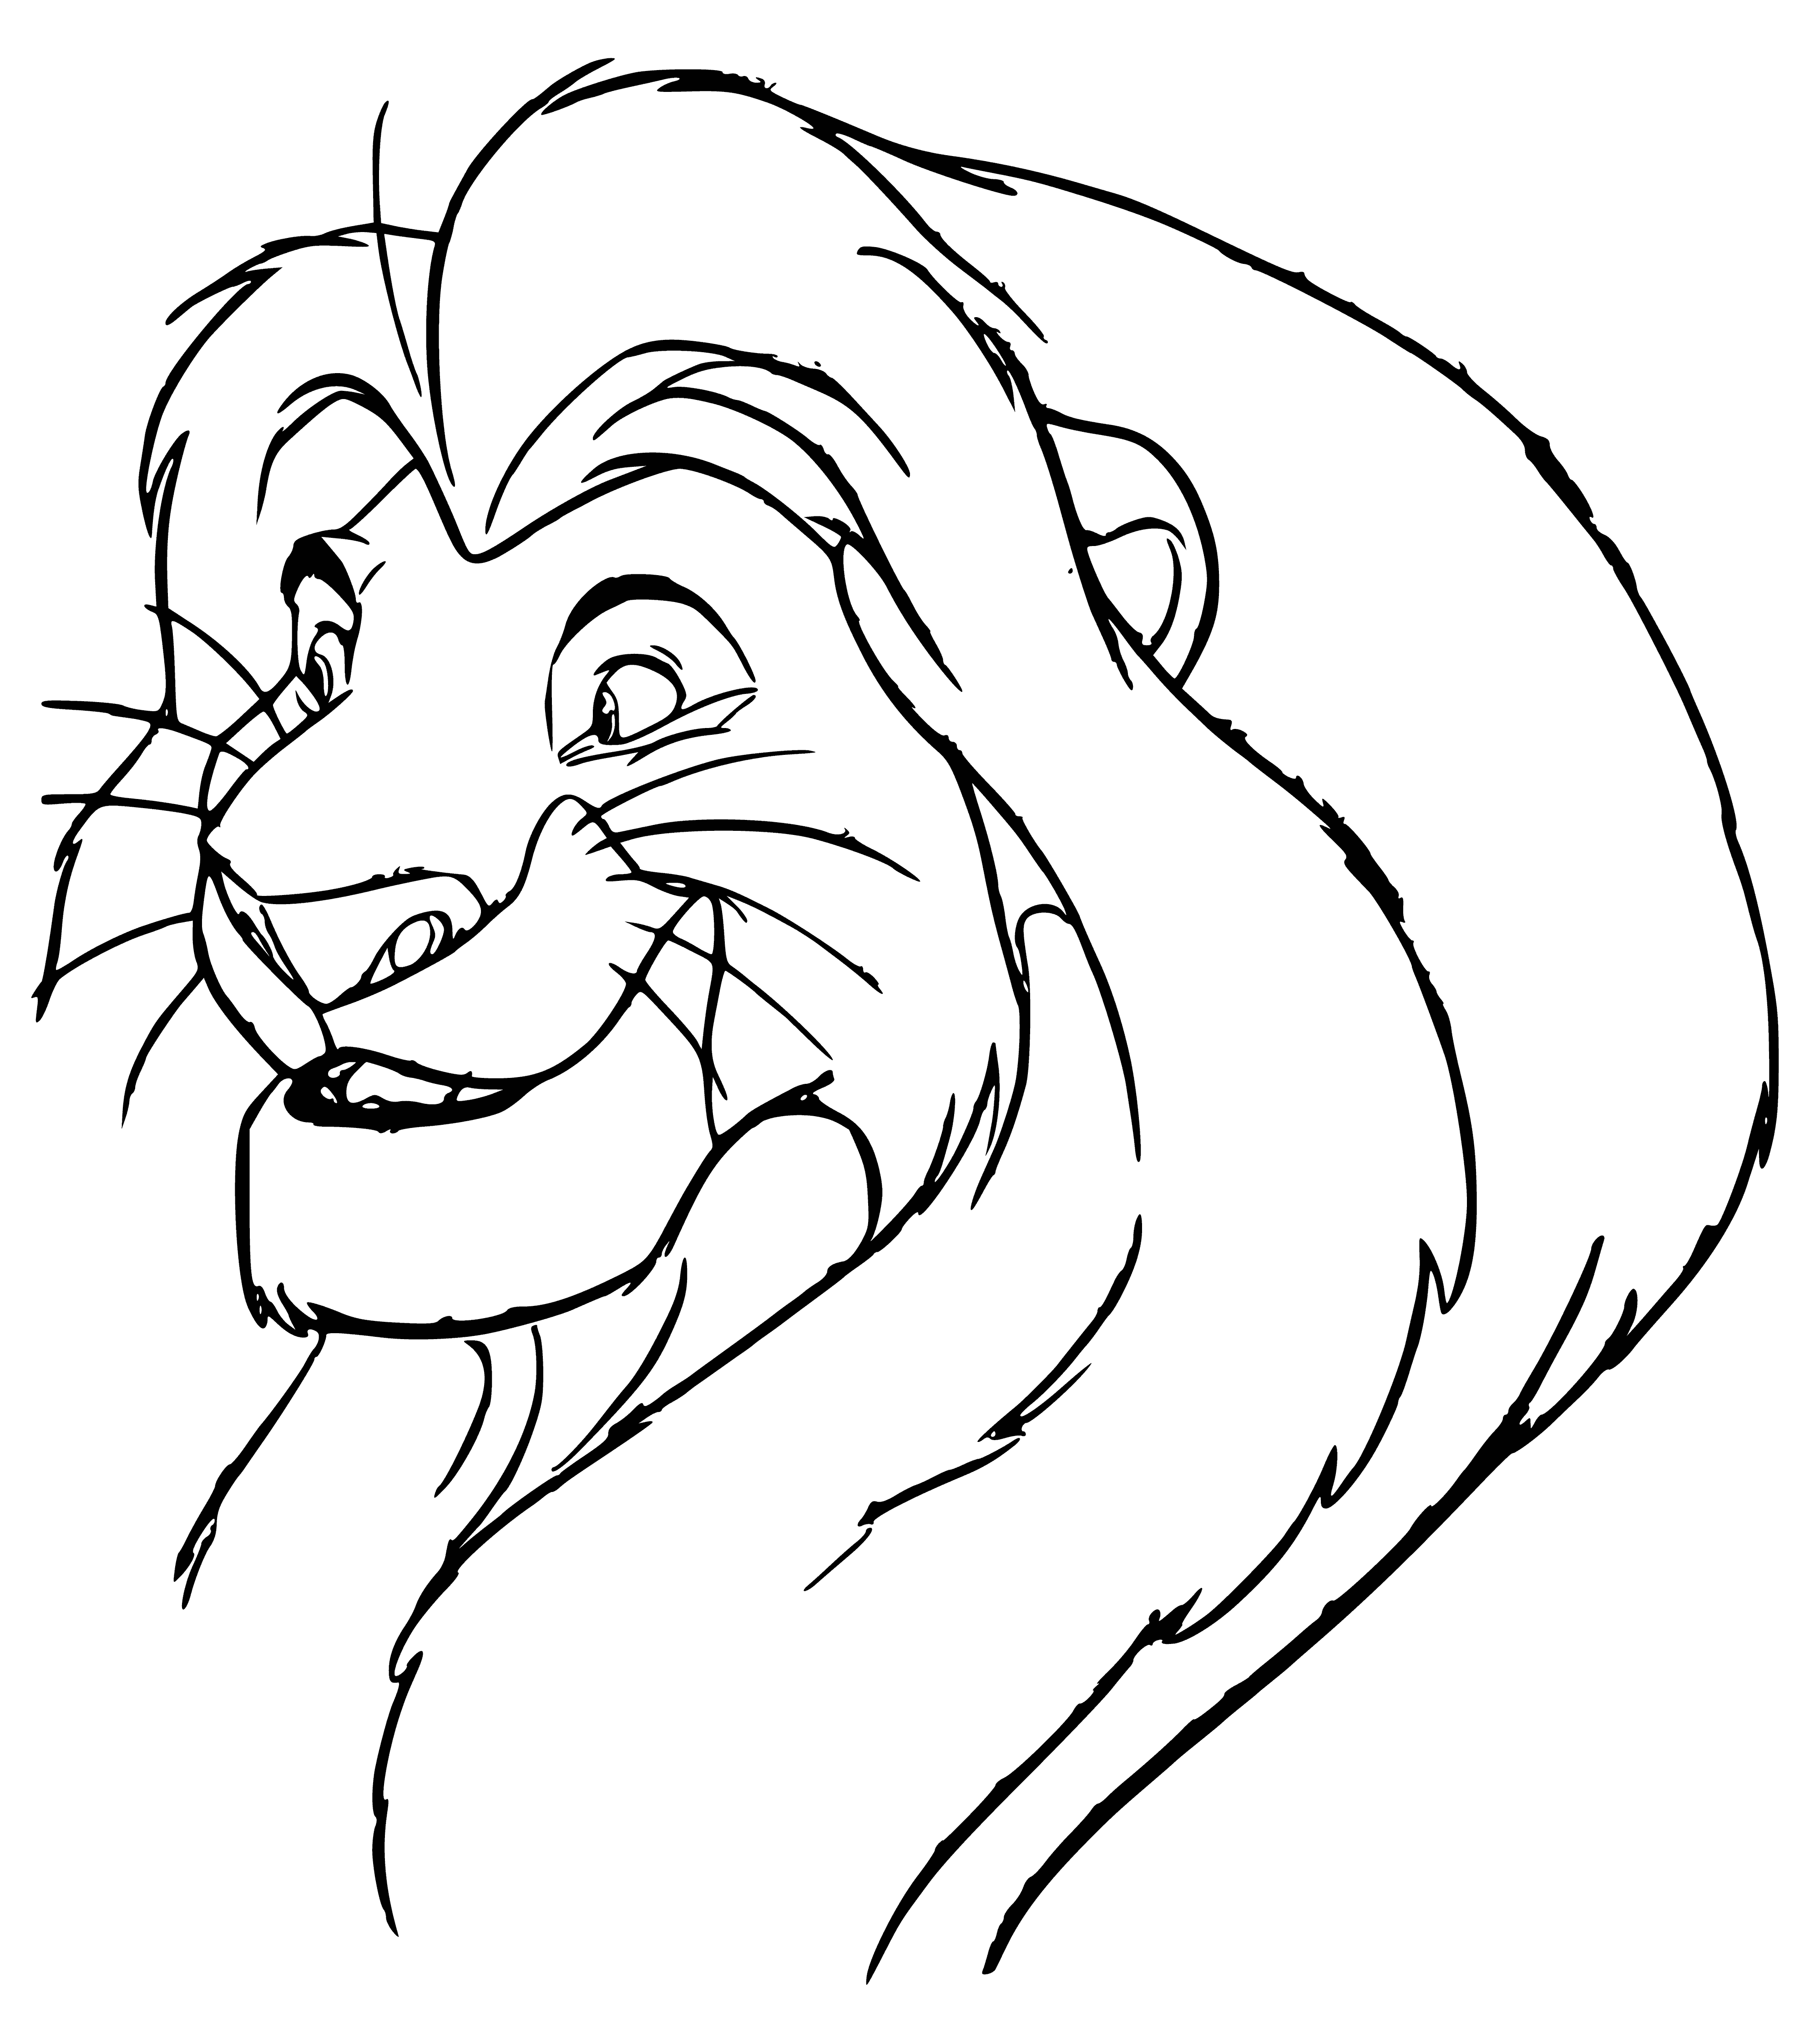 Simba grew up coloring page